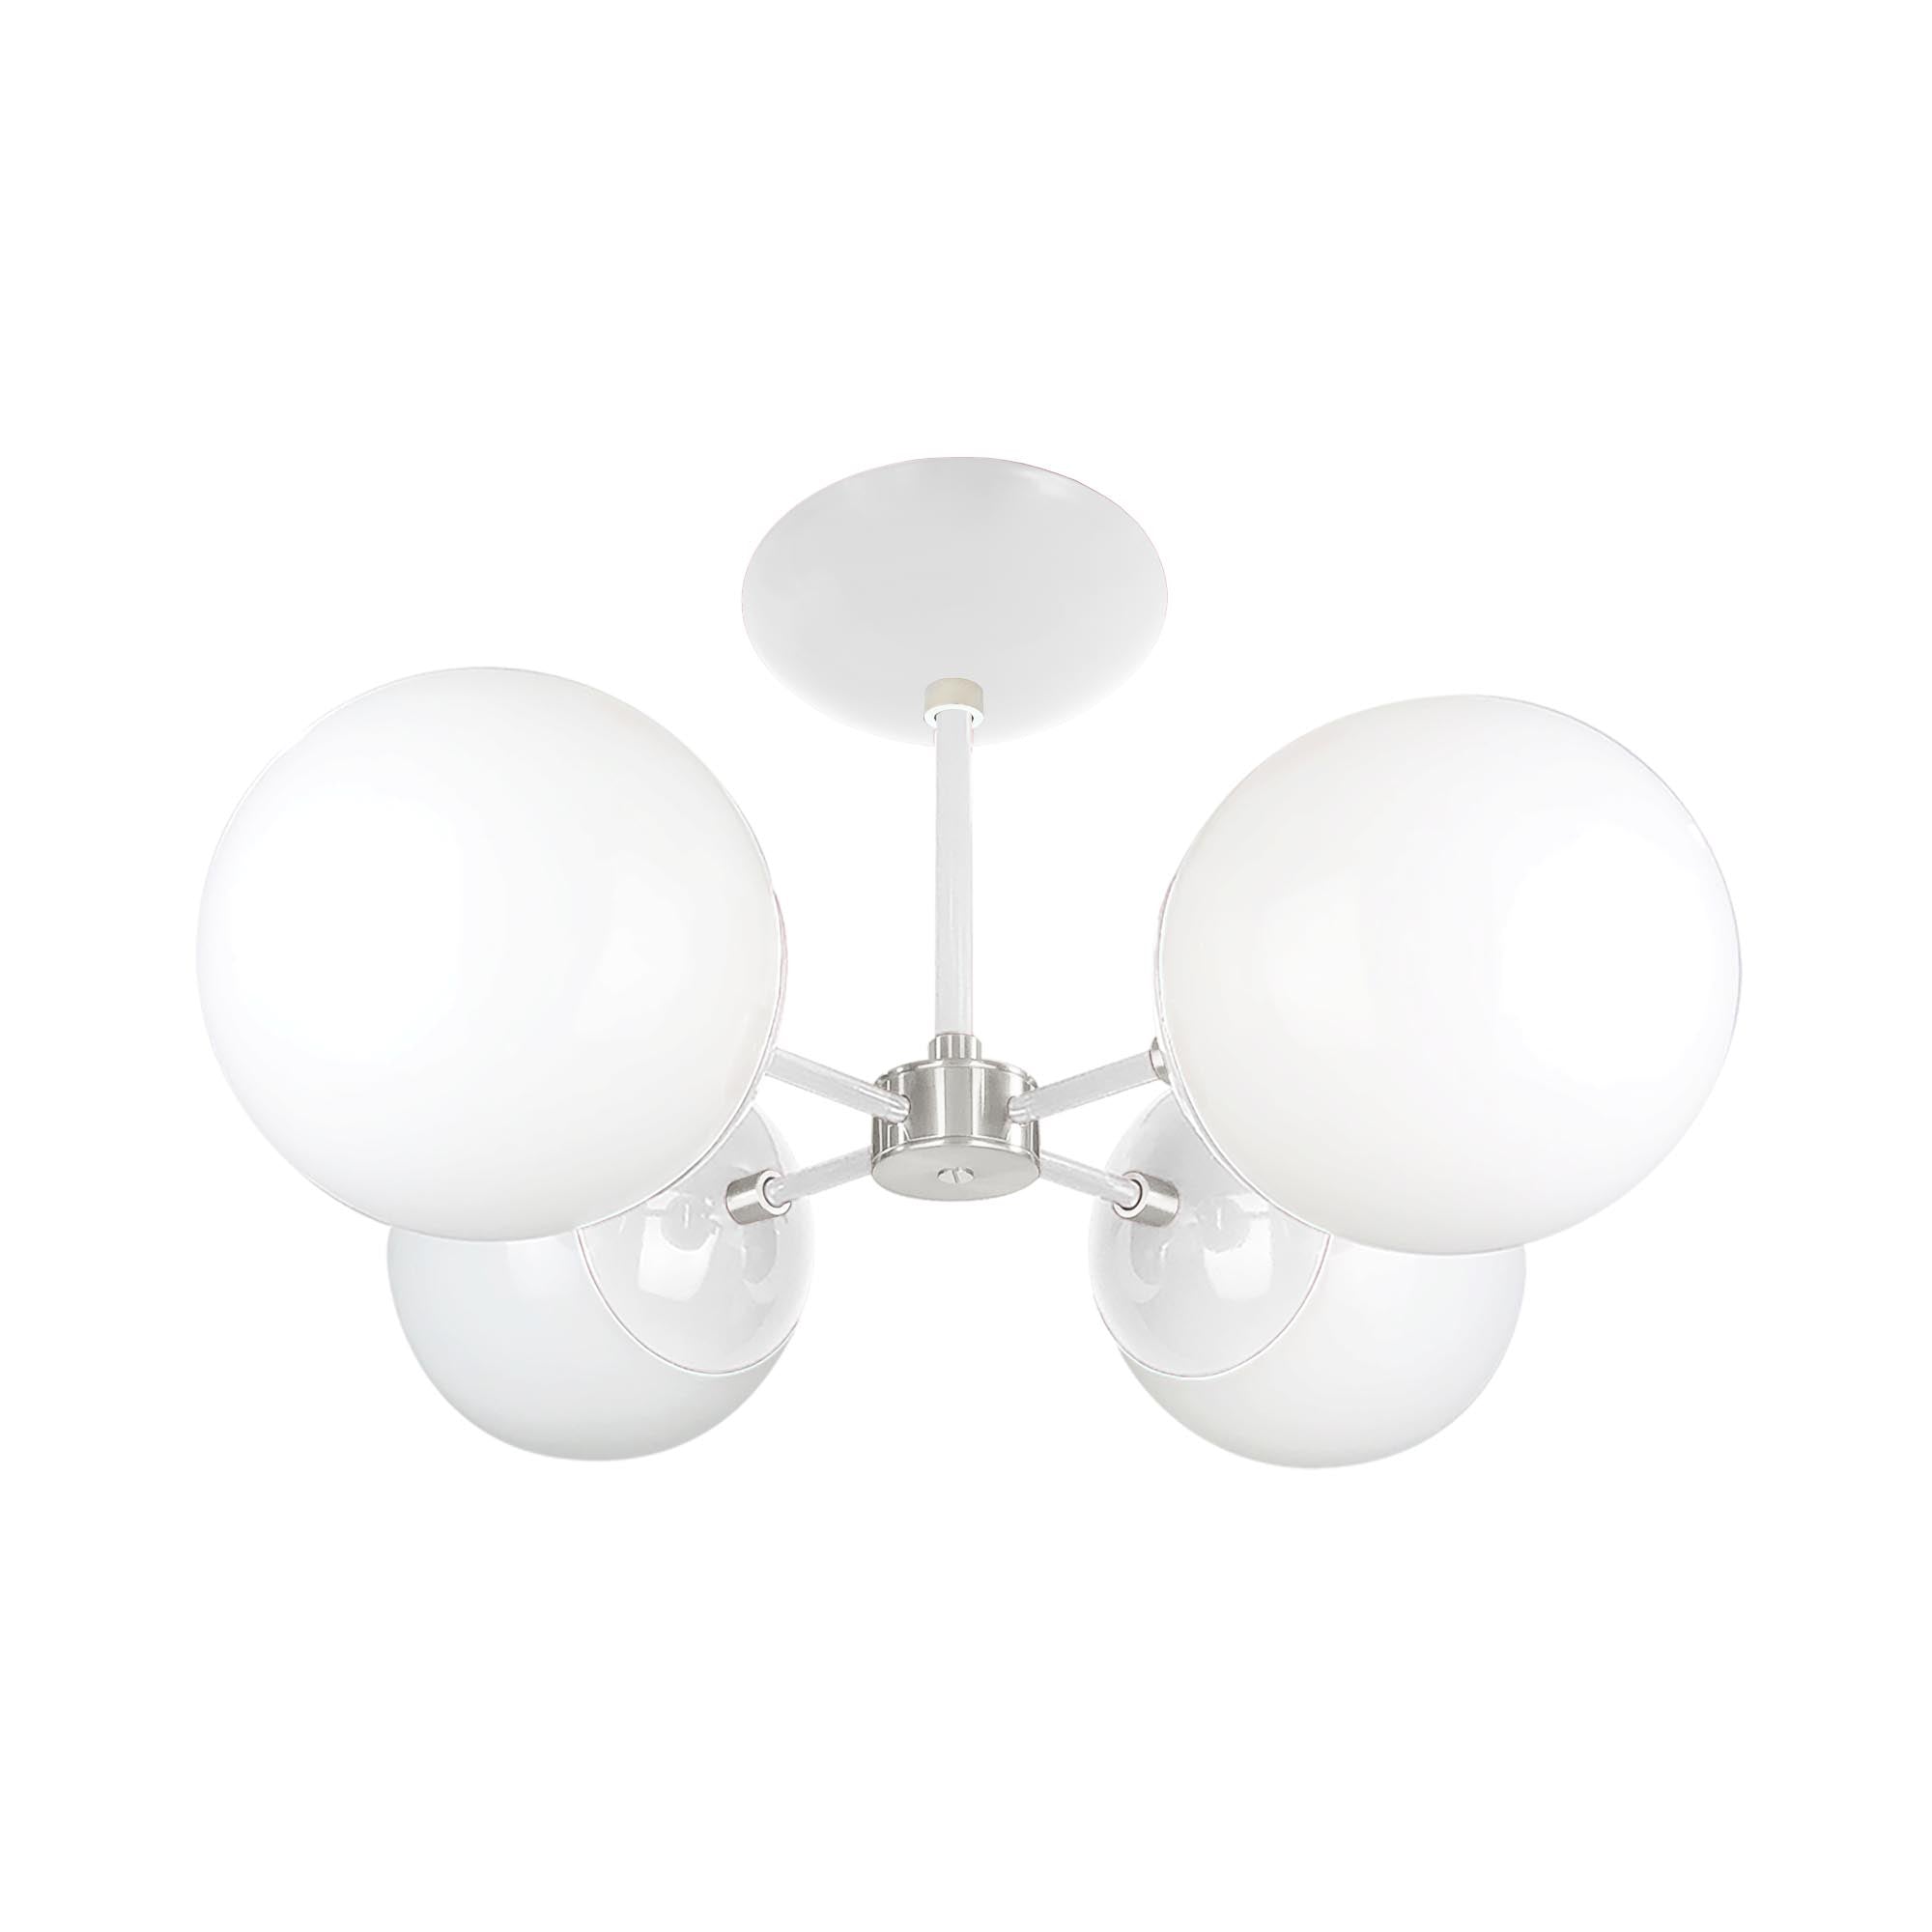 Nickel and white color Orbi flush mount Dutton Brown lighting